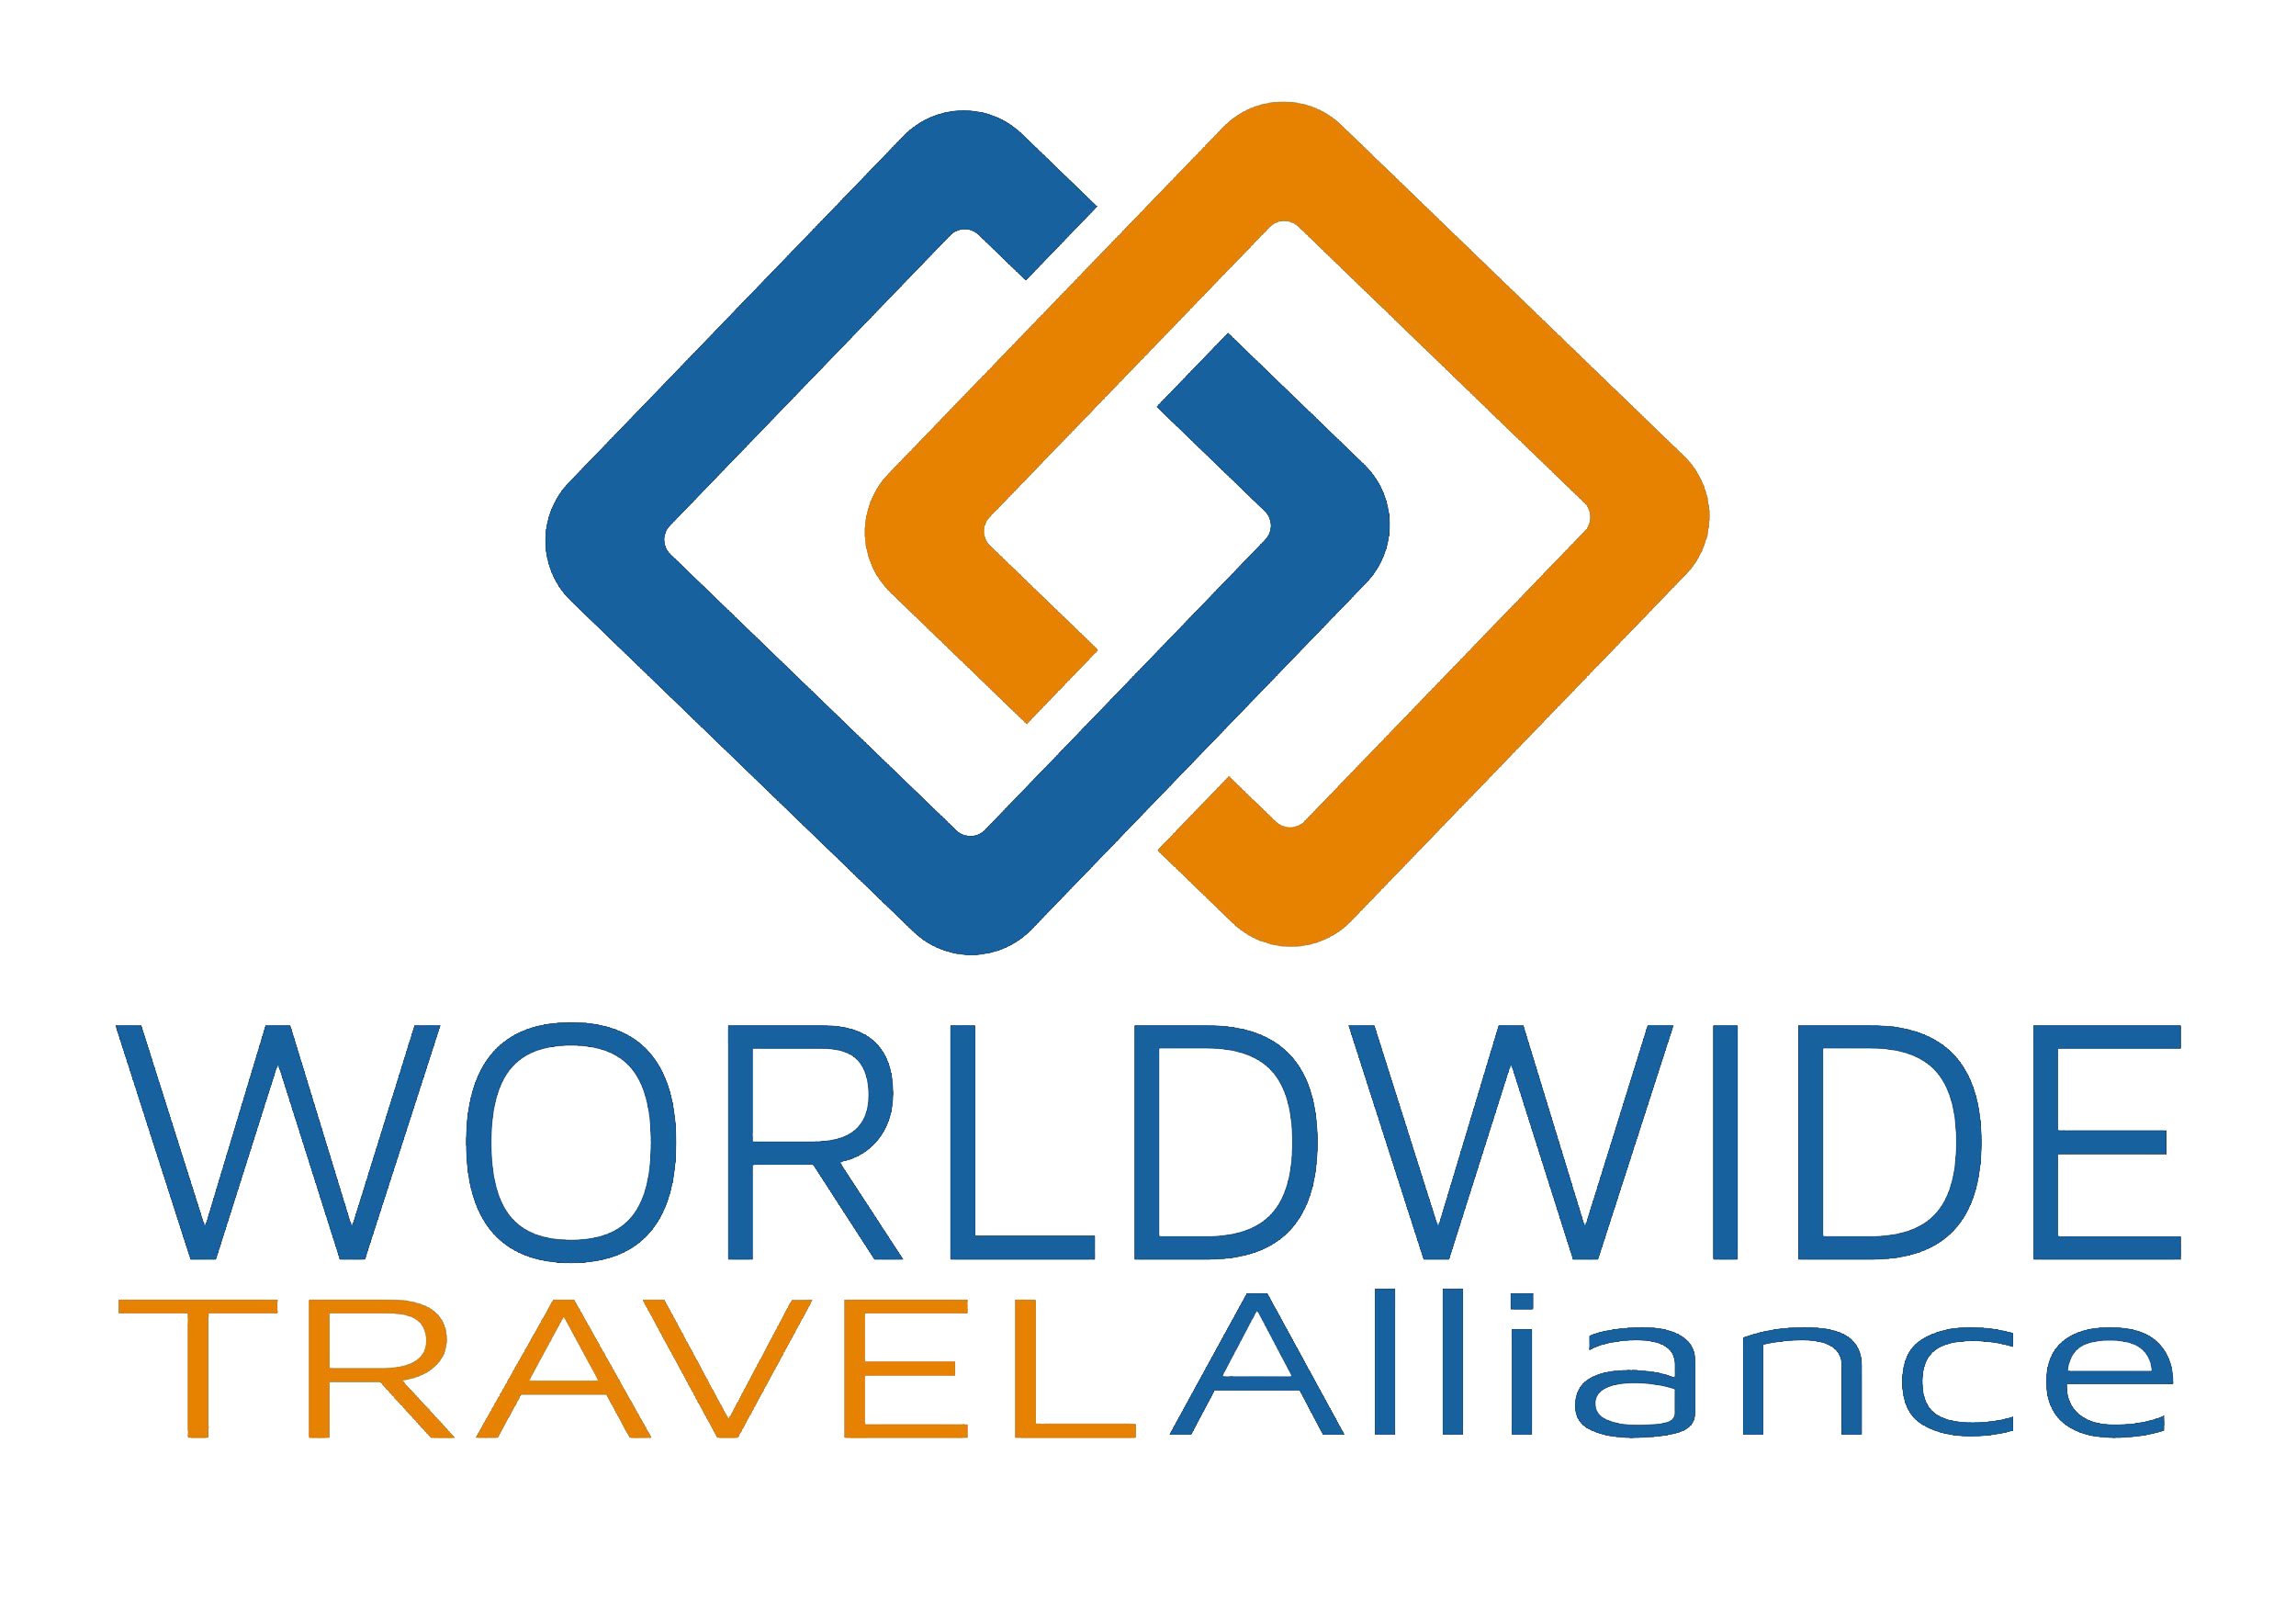 worldwide travel experts contact number